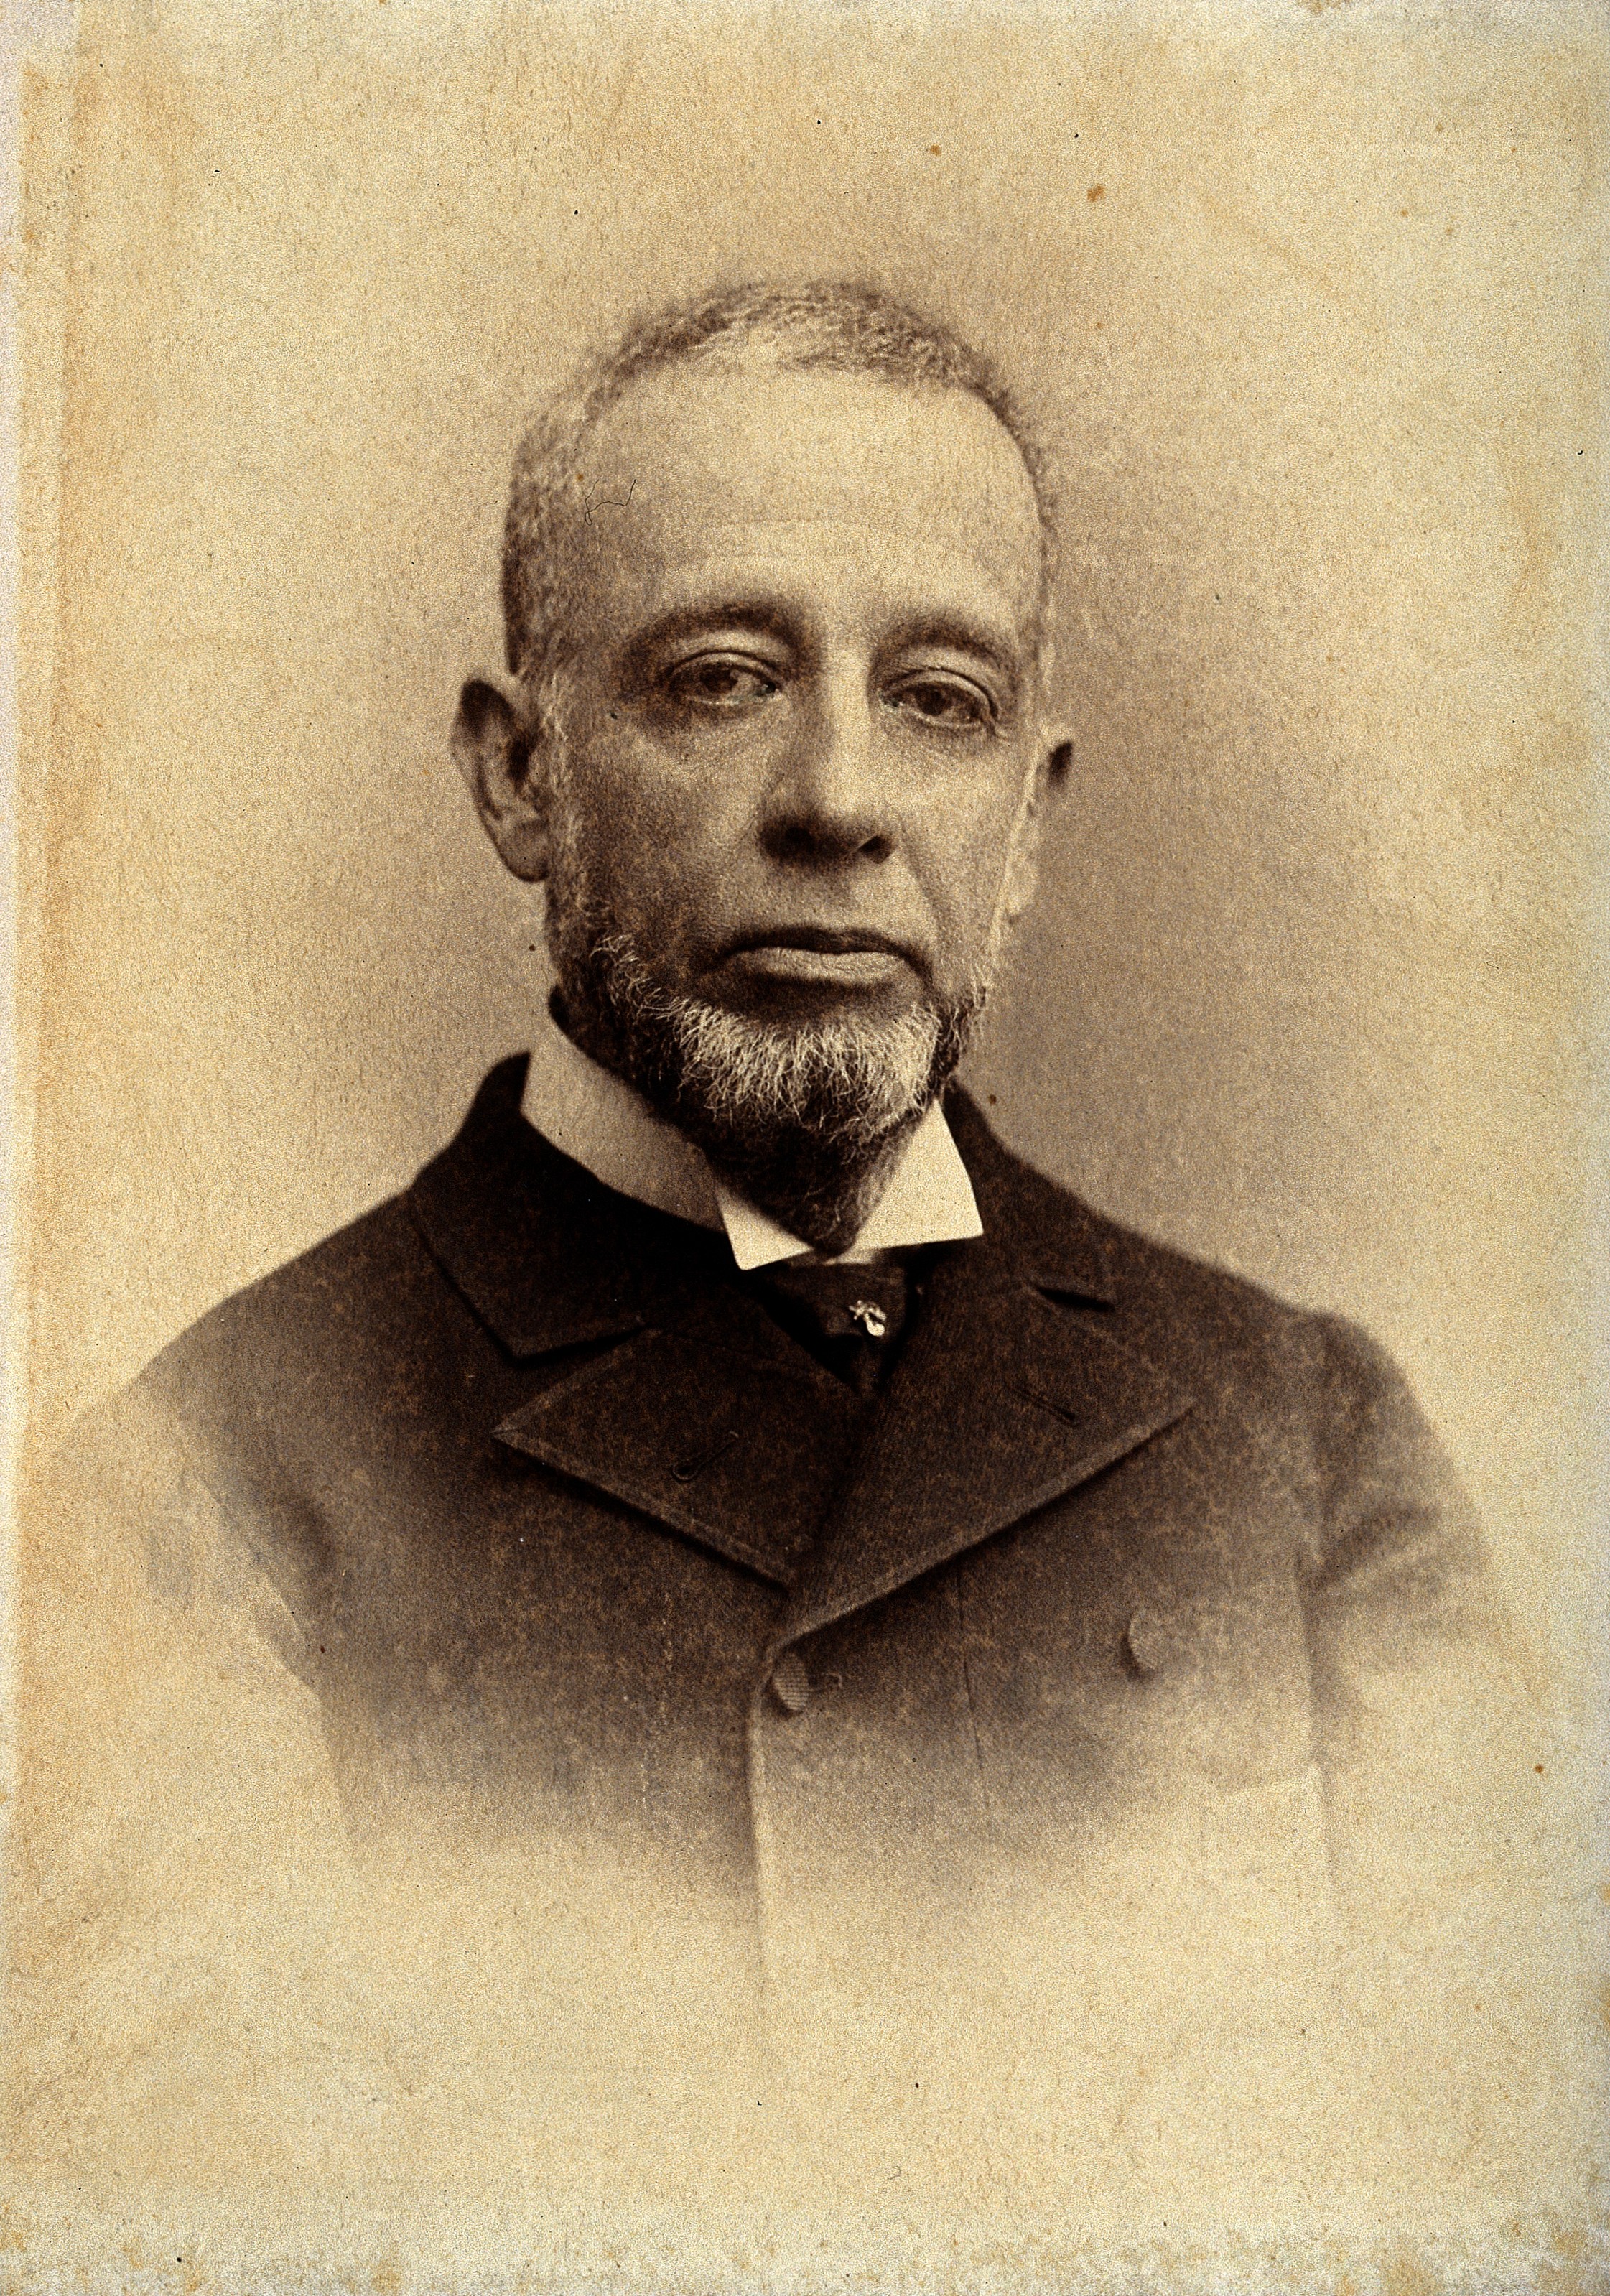 Juan Maná Rodriguez. Photograph by Cruces y Cia. Wellcome V0028301